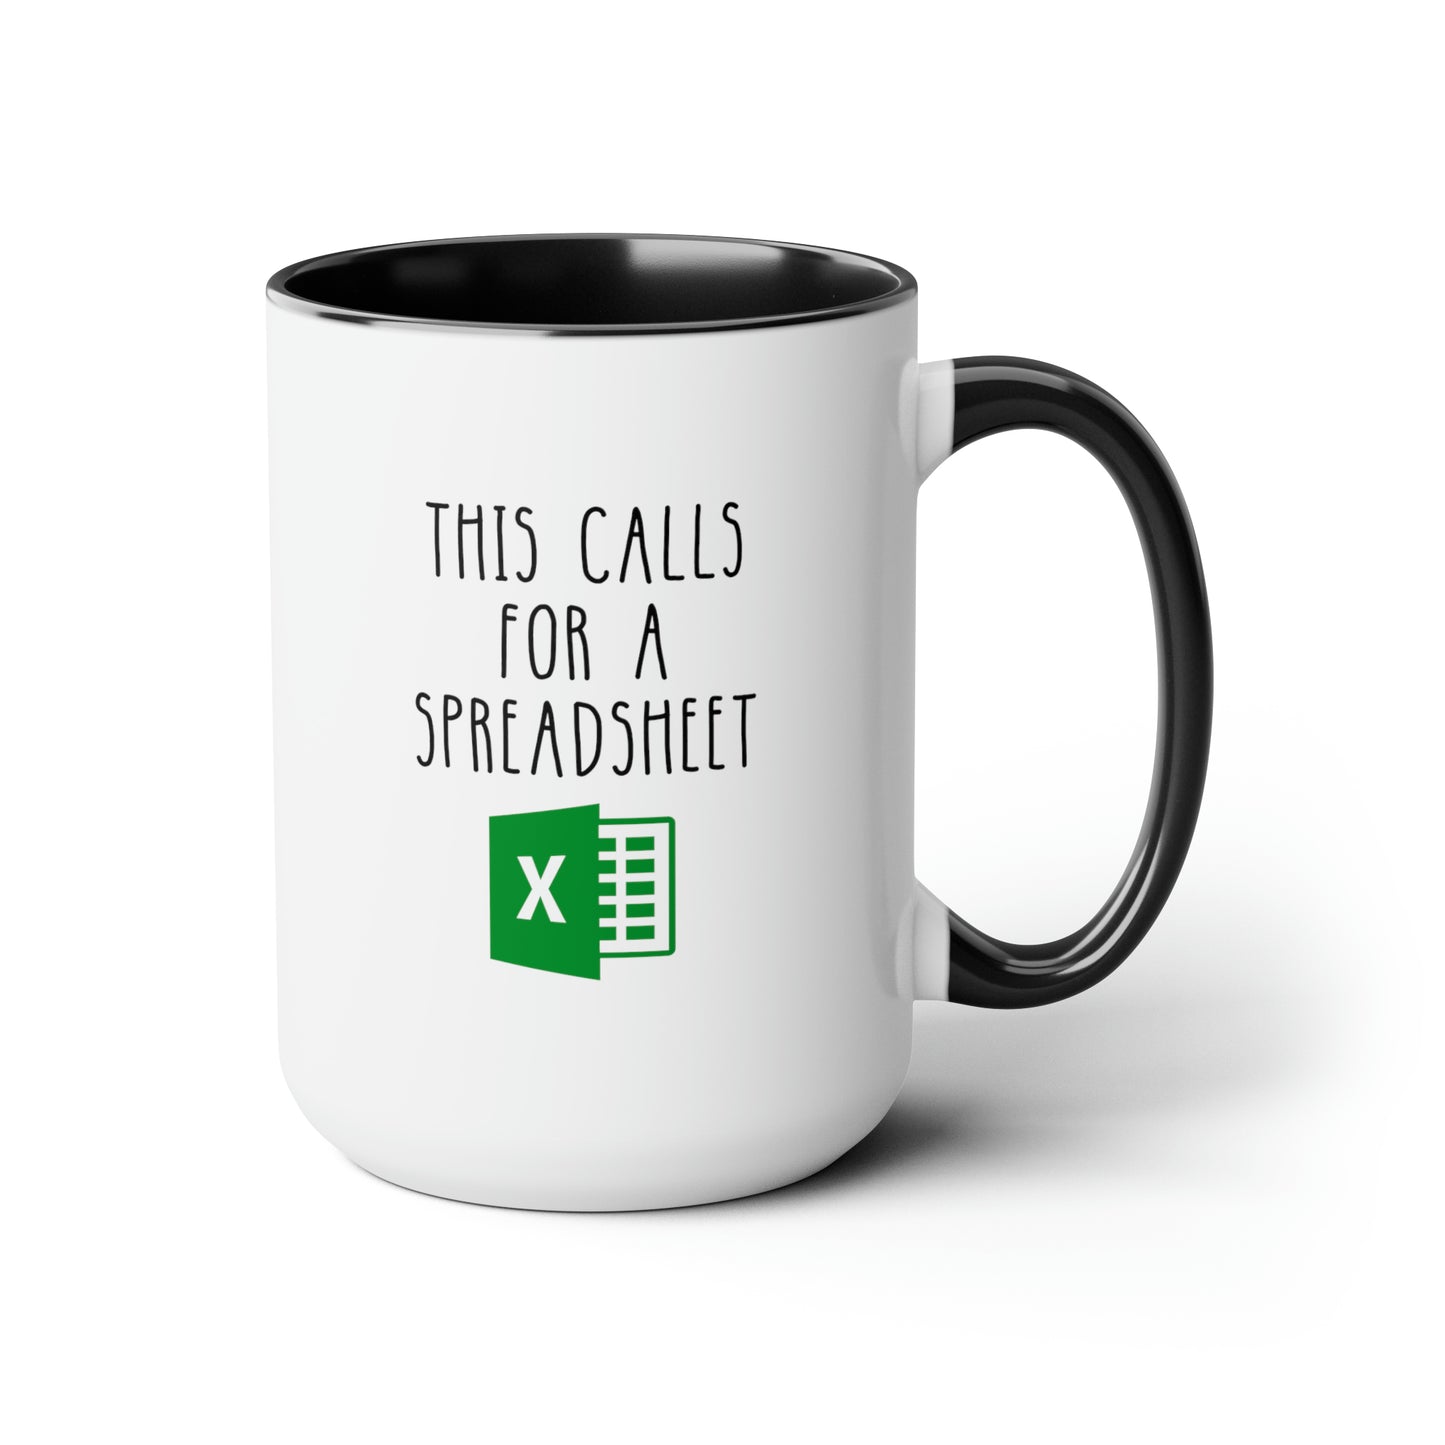 This Calls For A Spreadsheet 15oz white with black accent funny large coffee mug gift for coworker office decor excel accountant accounting waveywares wavey wares wavywares wavy wares